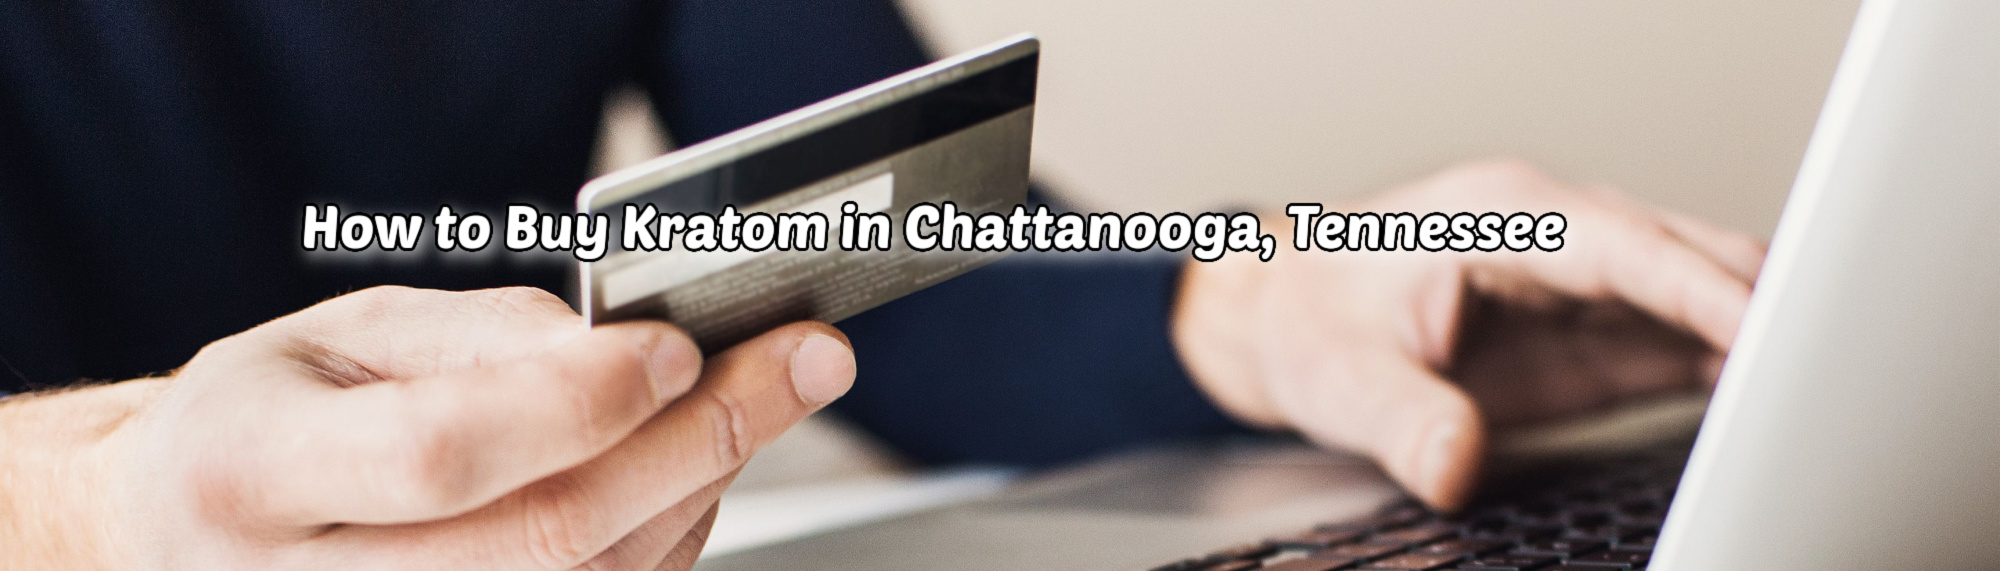 image of how to buy kratom in chattanooga tn